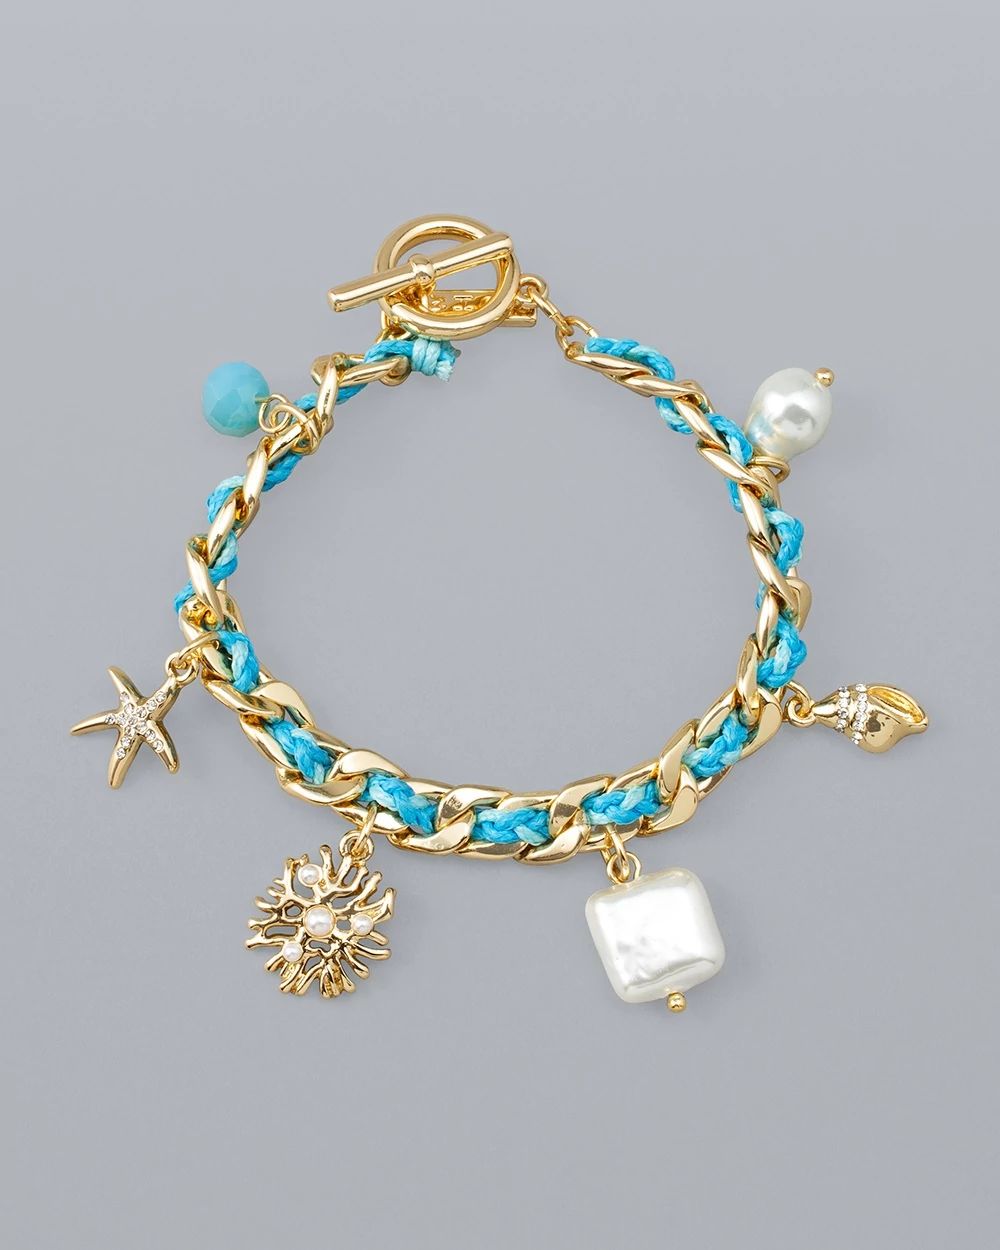 Woven Turquoise-Color And Goldtone Charm Bracelet